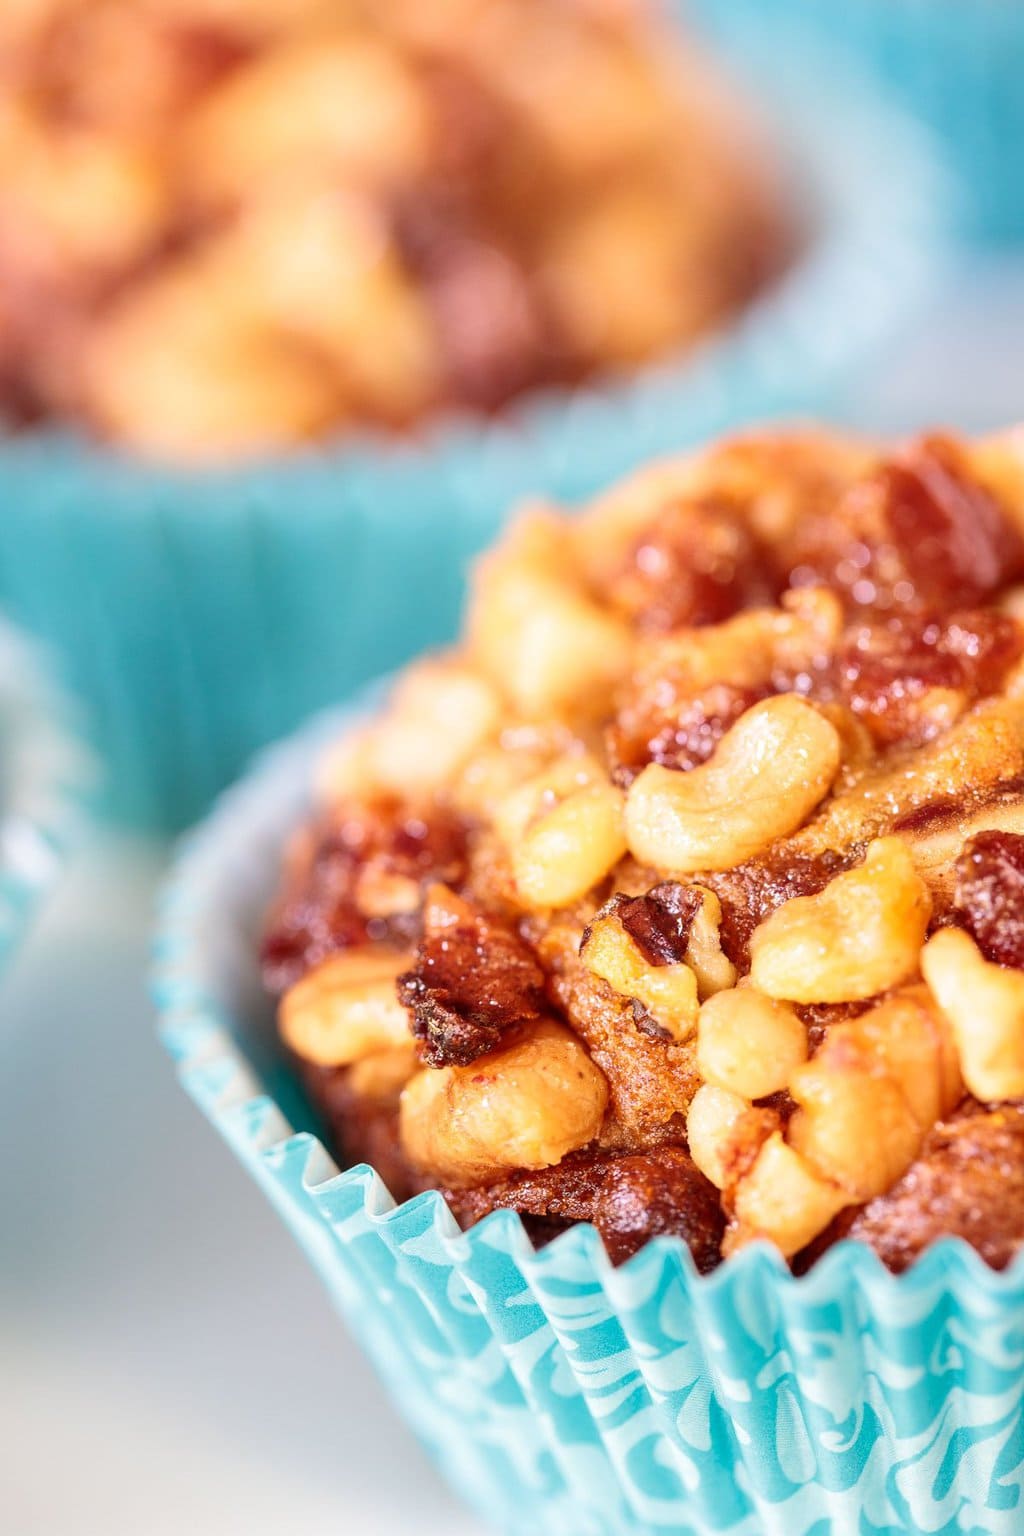 Vertical extreme closeup photo of Candied Walnut Date Banana Muffins in turquoise cupcake liners.